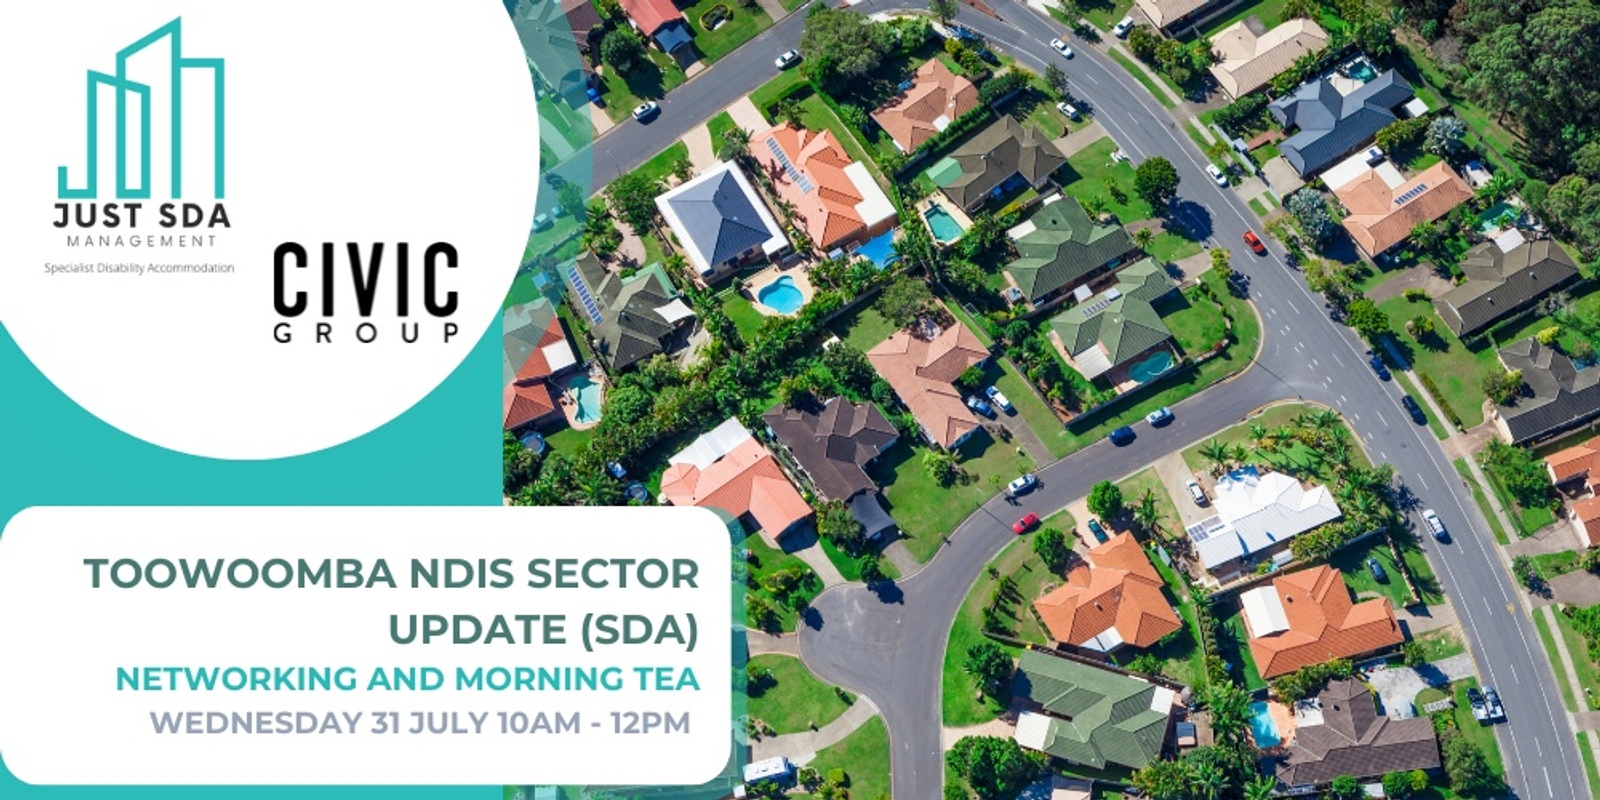 Banner image for Toowoomba NDIS SECTOR Update (SDA) - Networking and Morning Tea